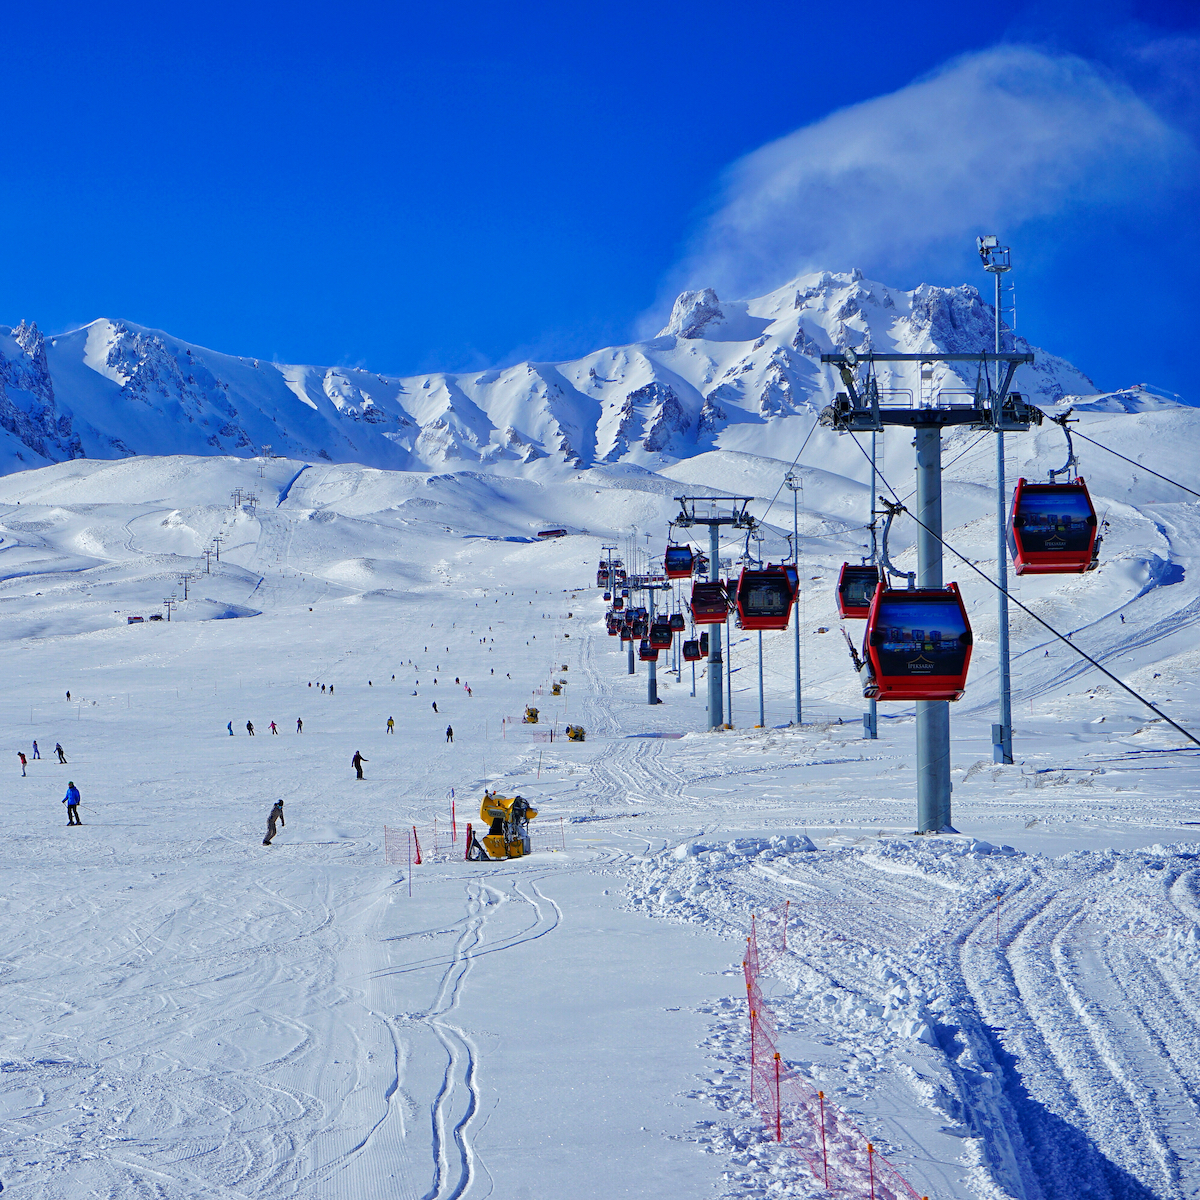 7 Fabulous Ski Resorts Around The World For All Levels